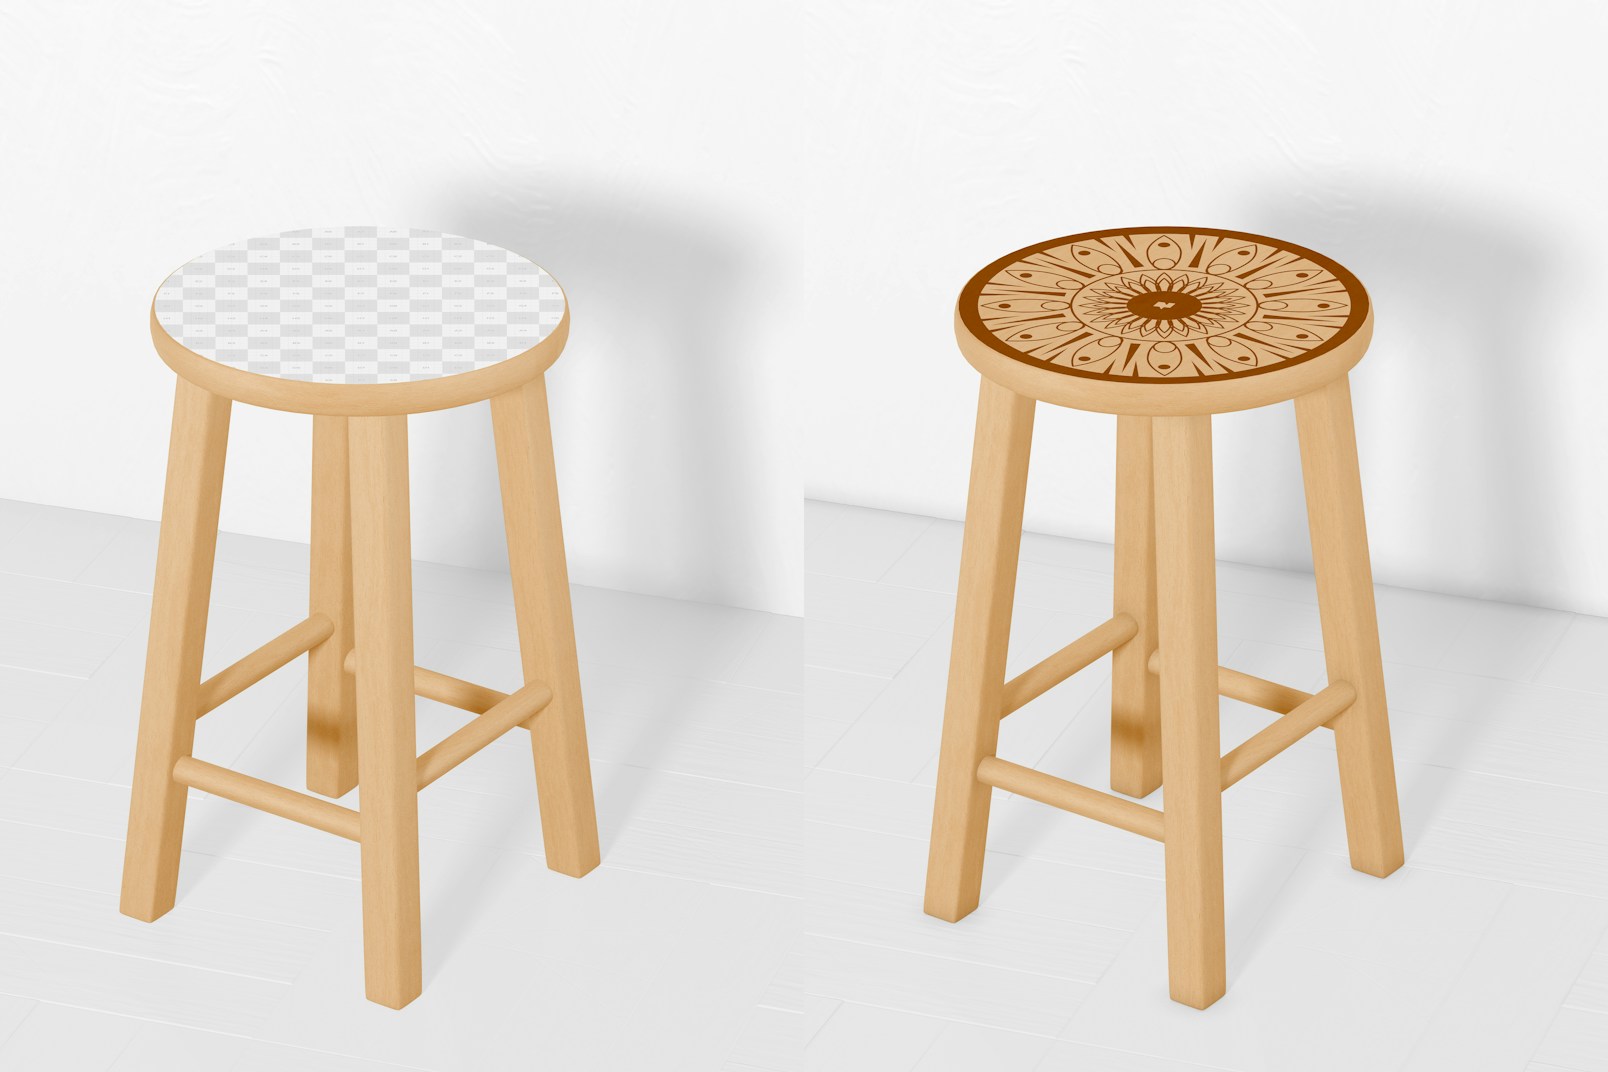 Round Wooden Stool Mockup, Front View